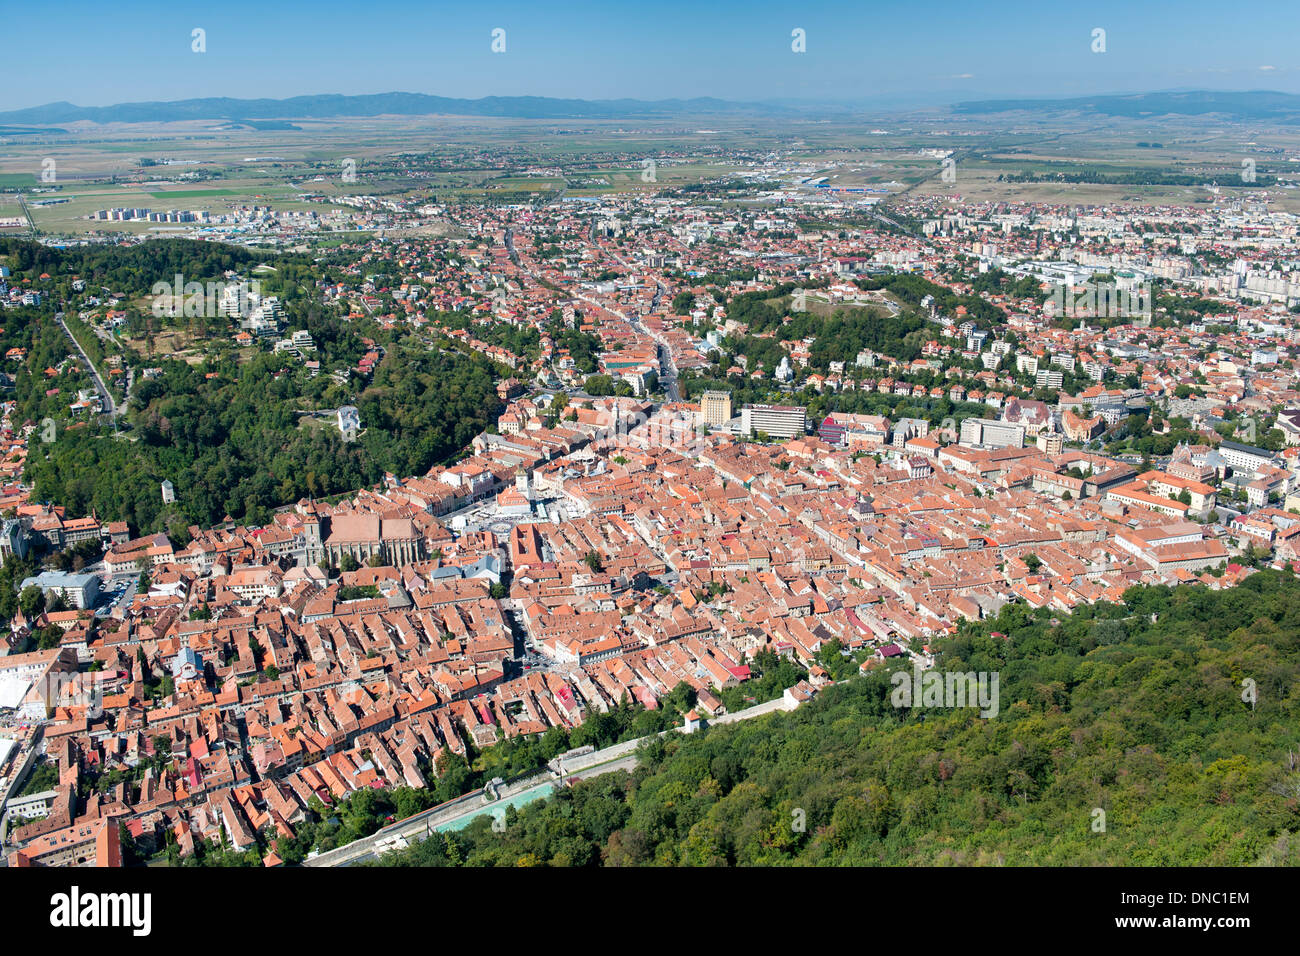 View of the old town of Brasov, a city in the Transylvania region of central Romania. Stock Photo